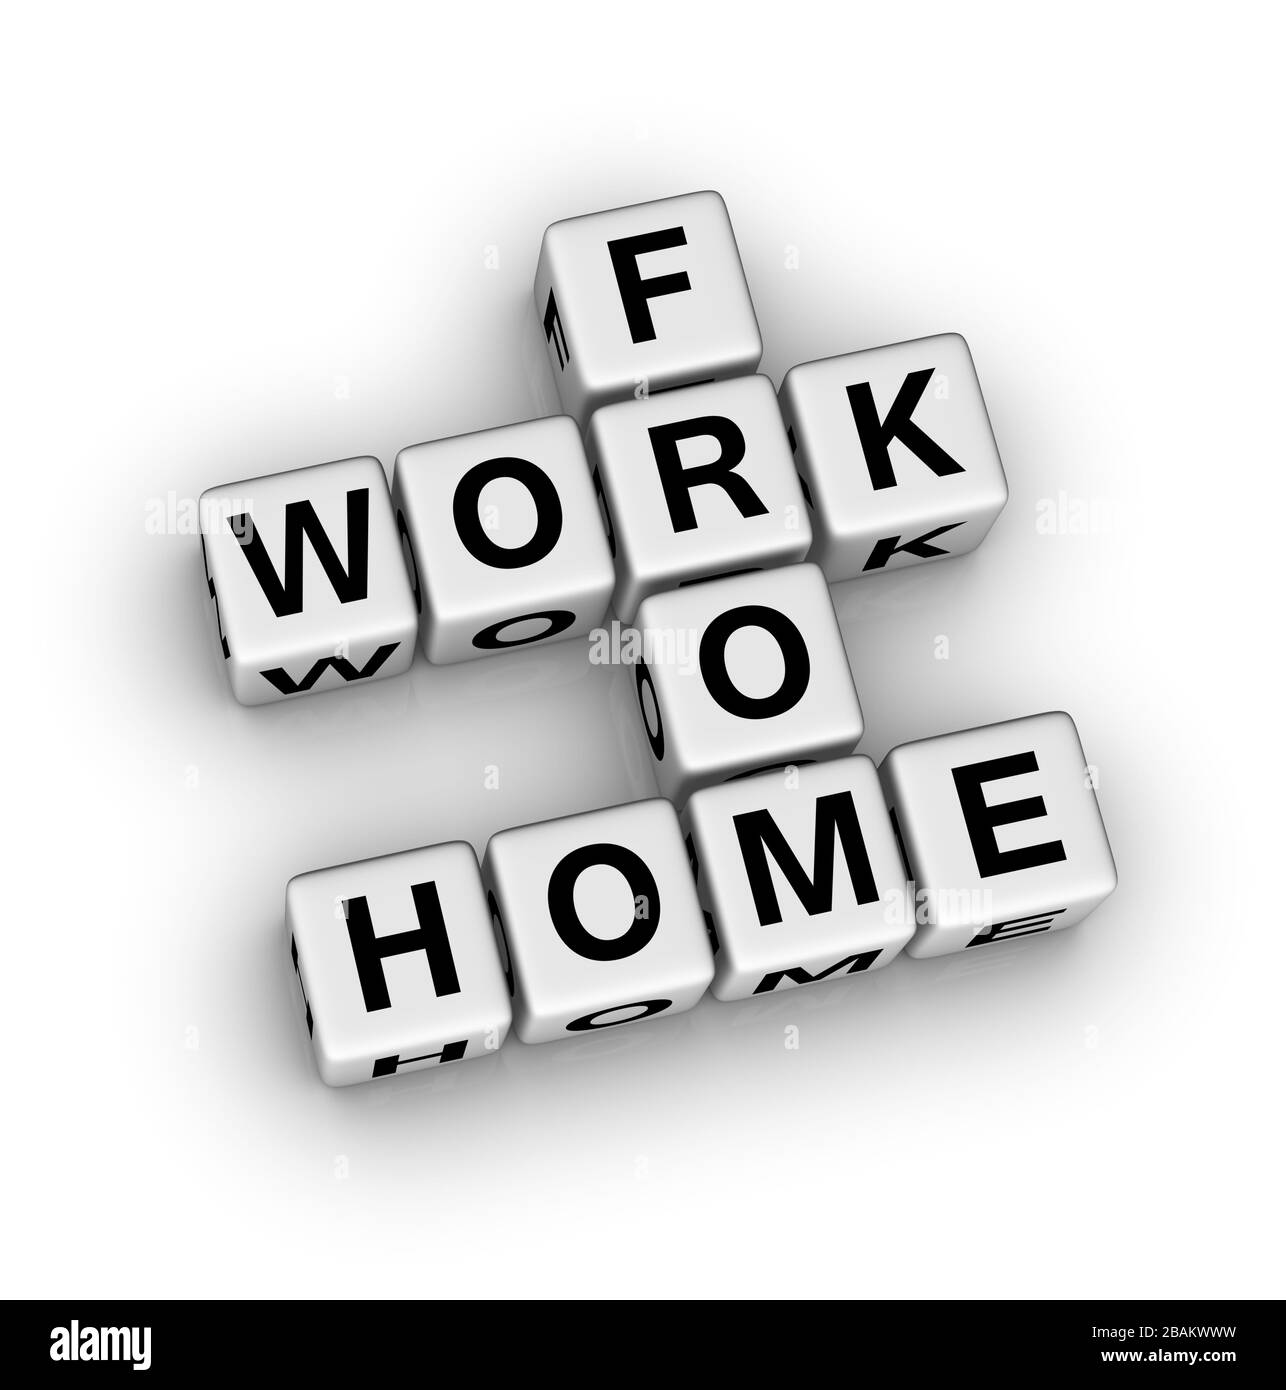 Work from home. 3d crossword puzzle illustration. Stock Photo